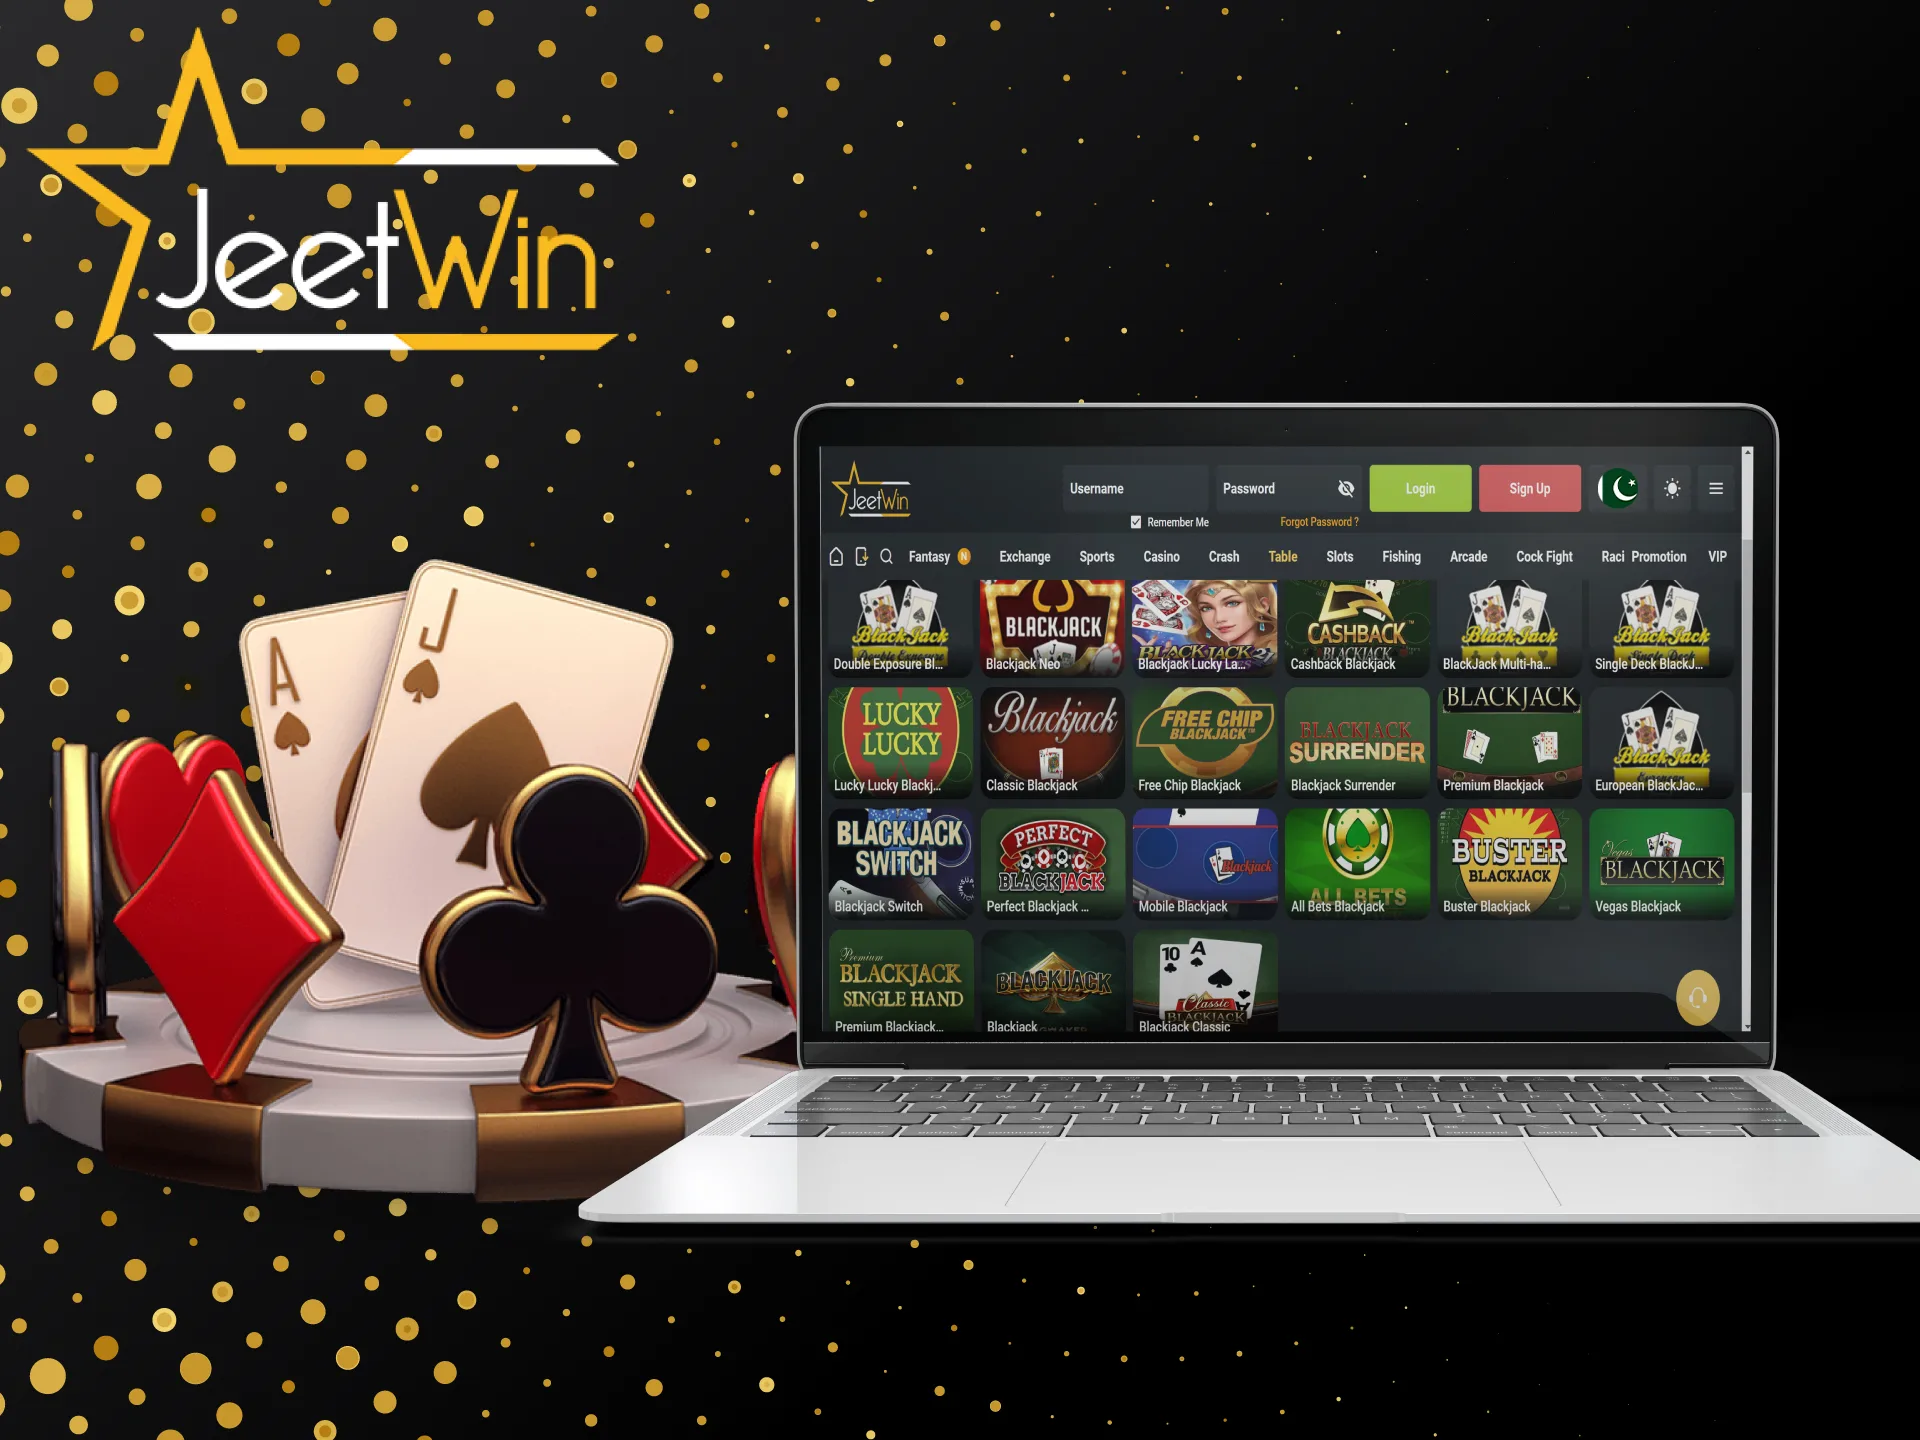 Choose your strategy, place your bets and beat the dealer with JeetWin.